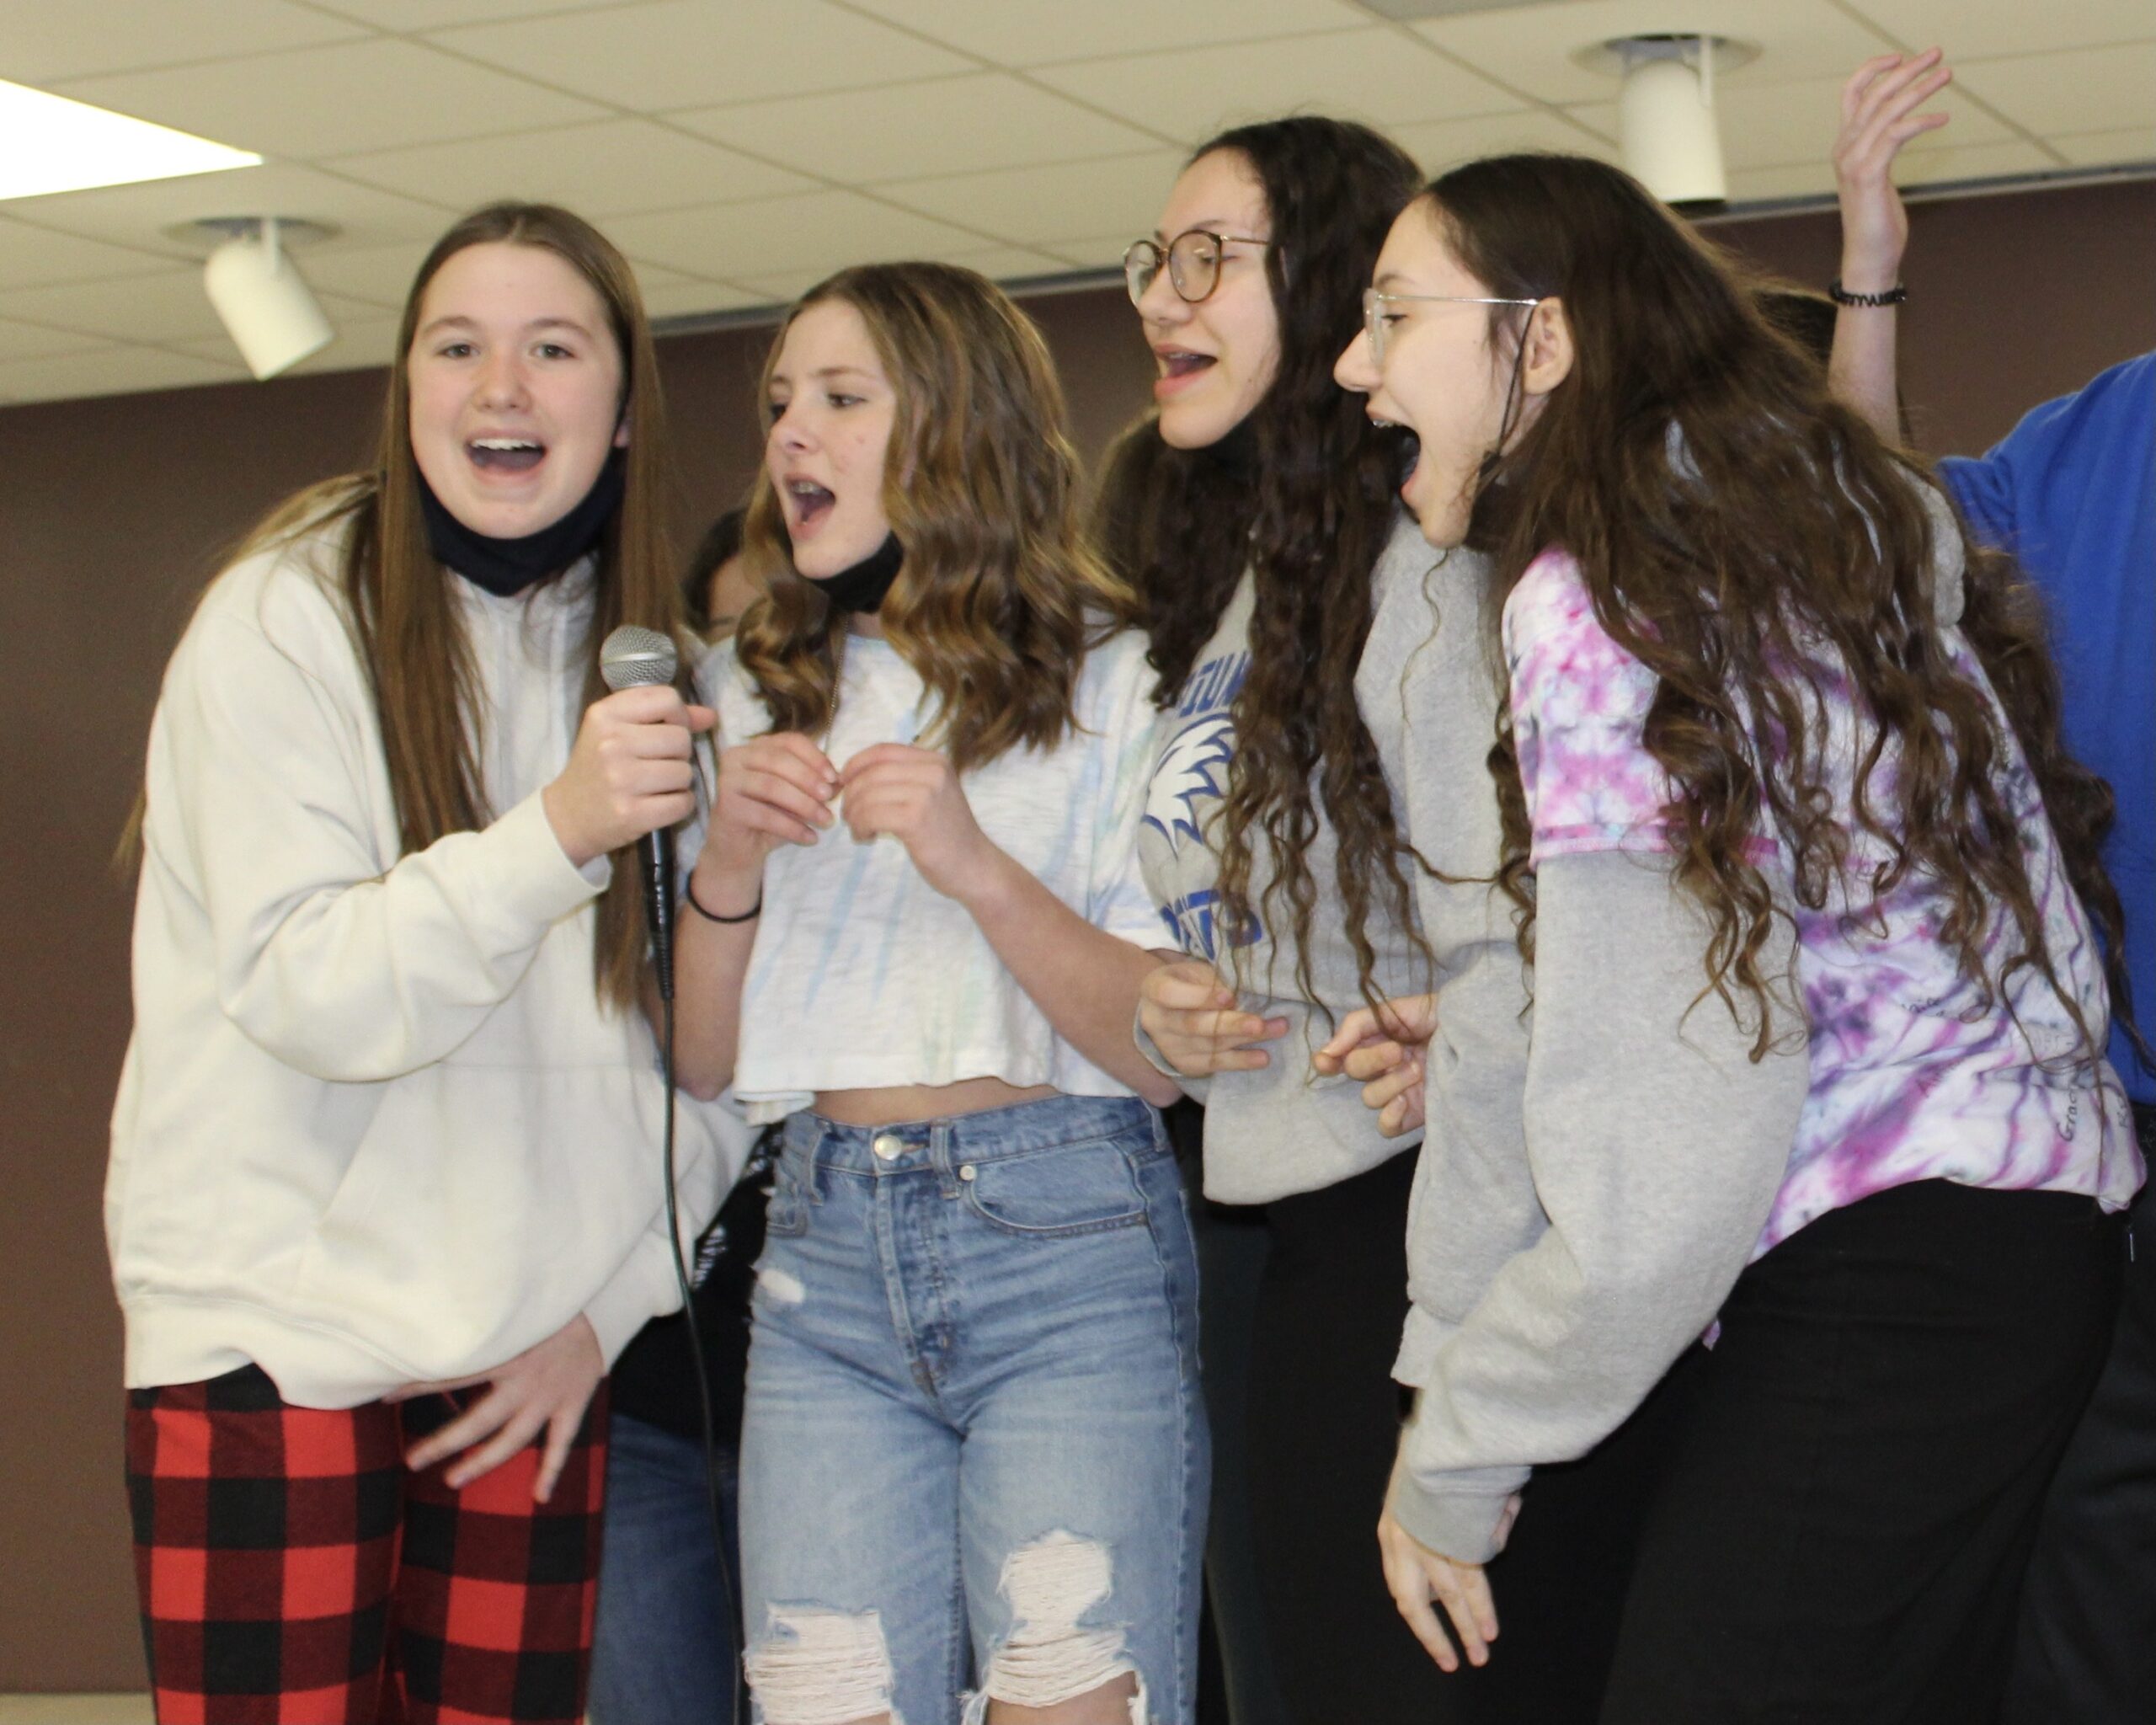 Girls singing into a microphone.